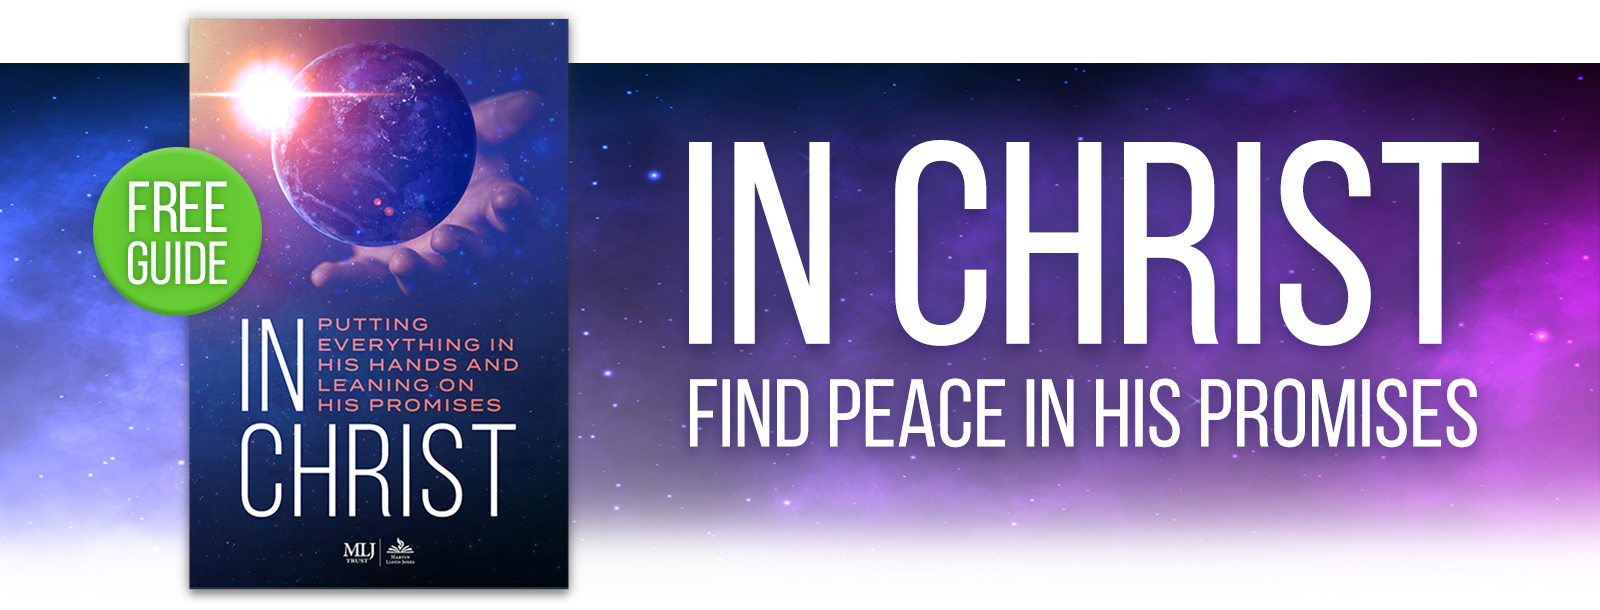 In Christ Find Peace in His Promises - Free Guide